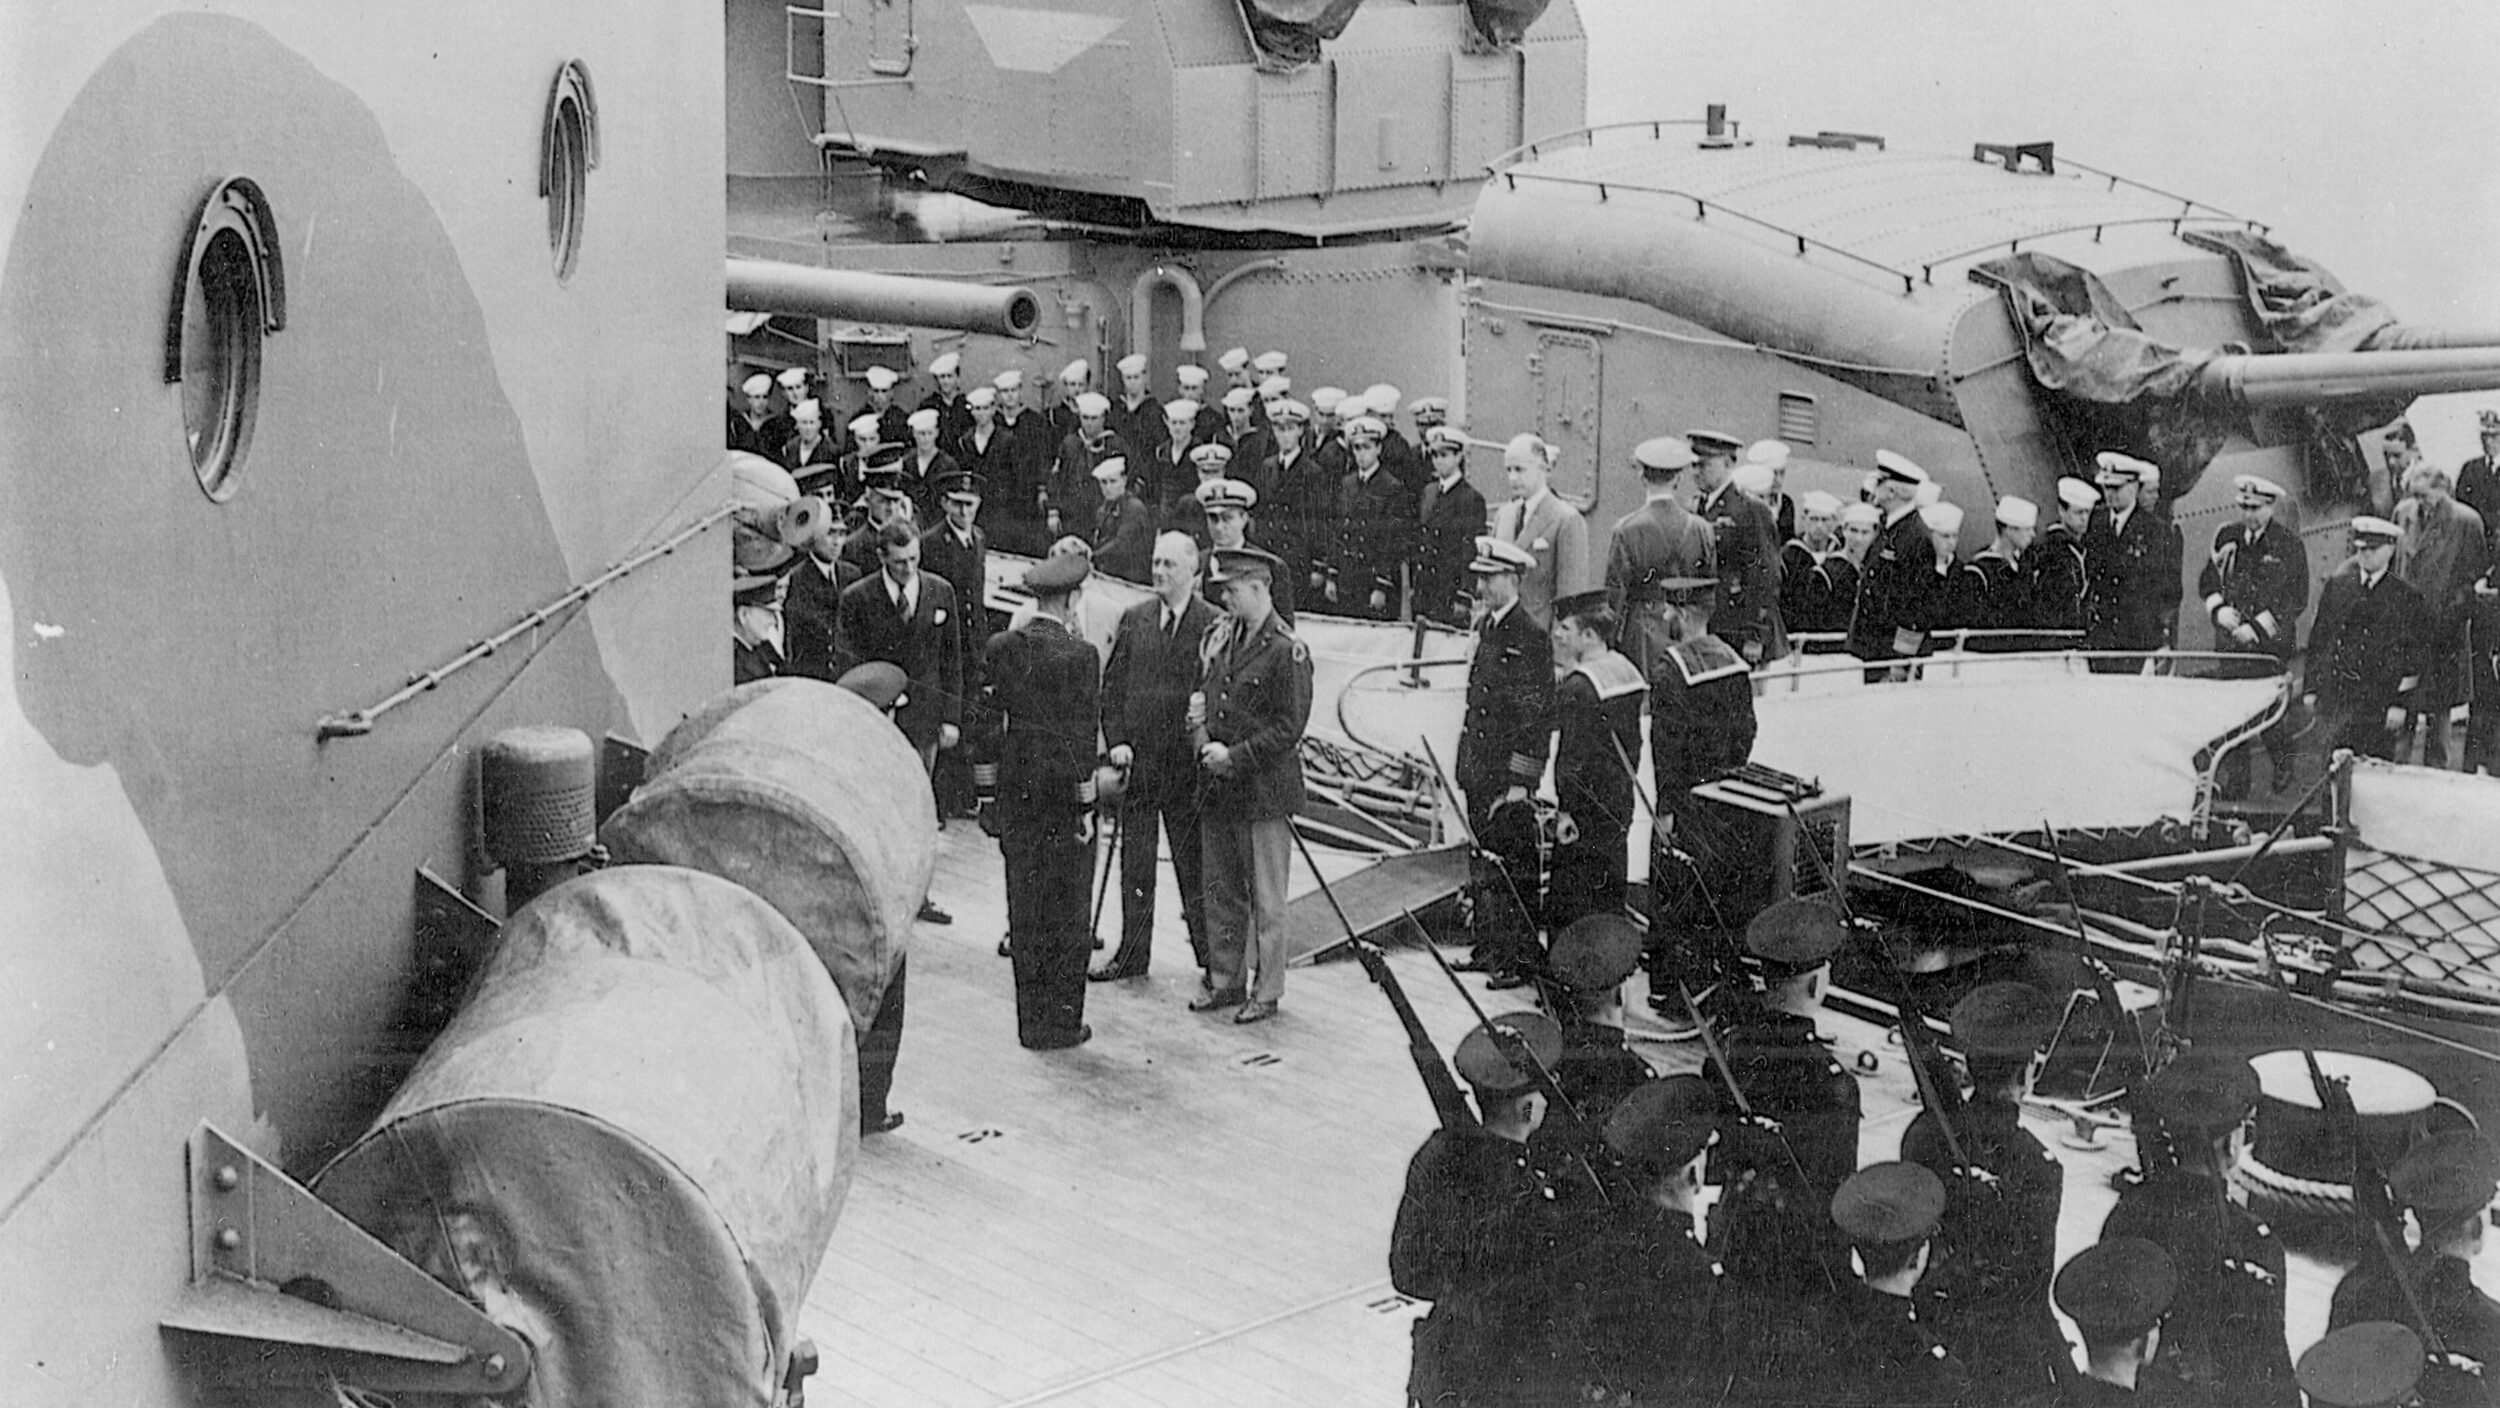 President Franklin D. Roosevelt boards the battleship HMS Prince of Wales to attend his first meeting with Prime Minister Winston Churchill.